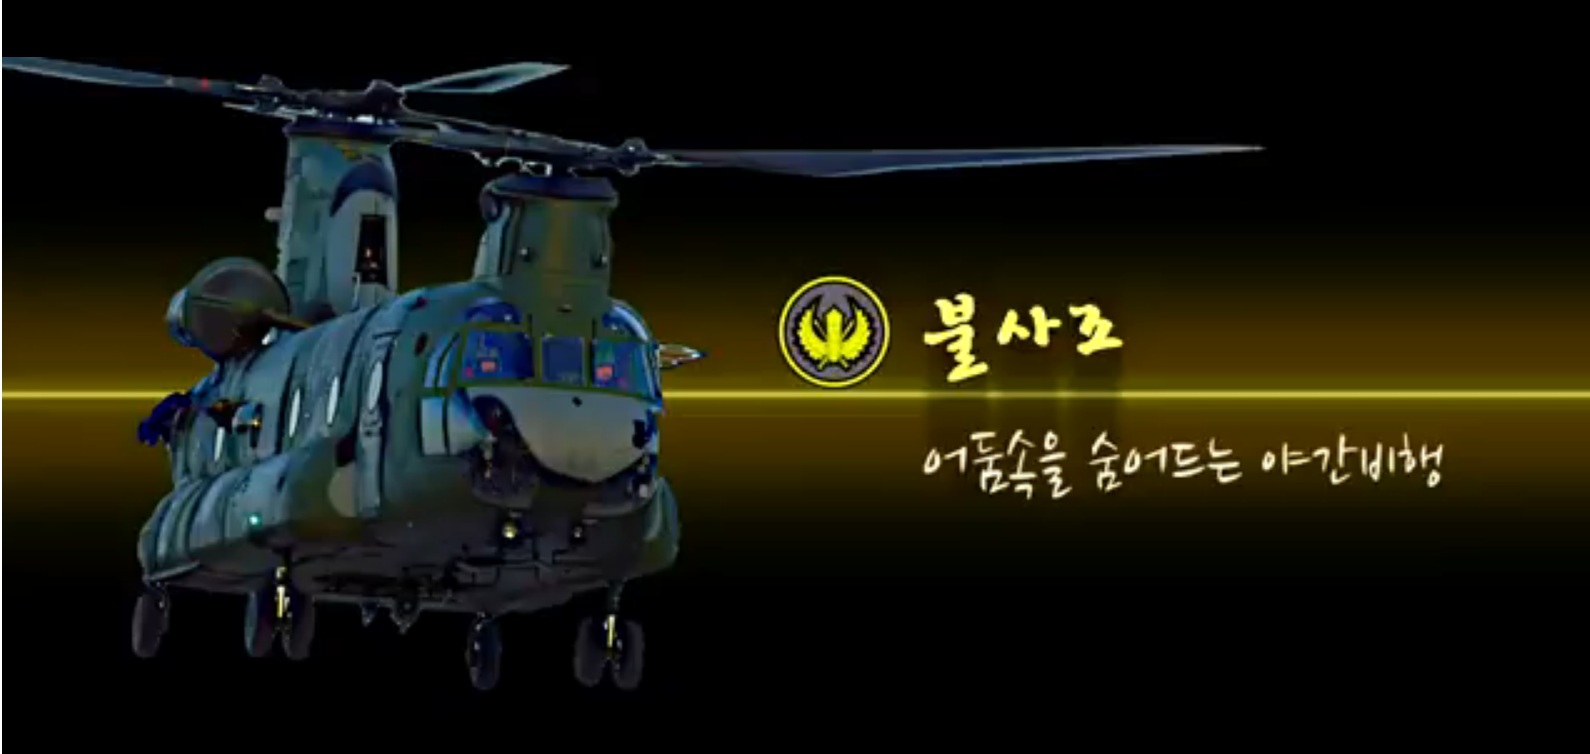 South Korean CH-47 Chinook heavy-lift helicopters